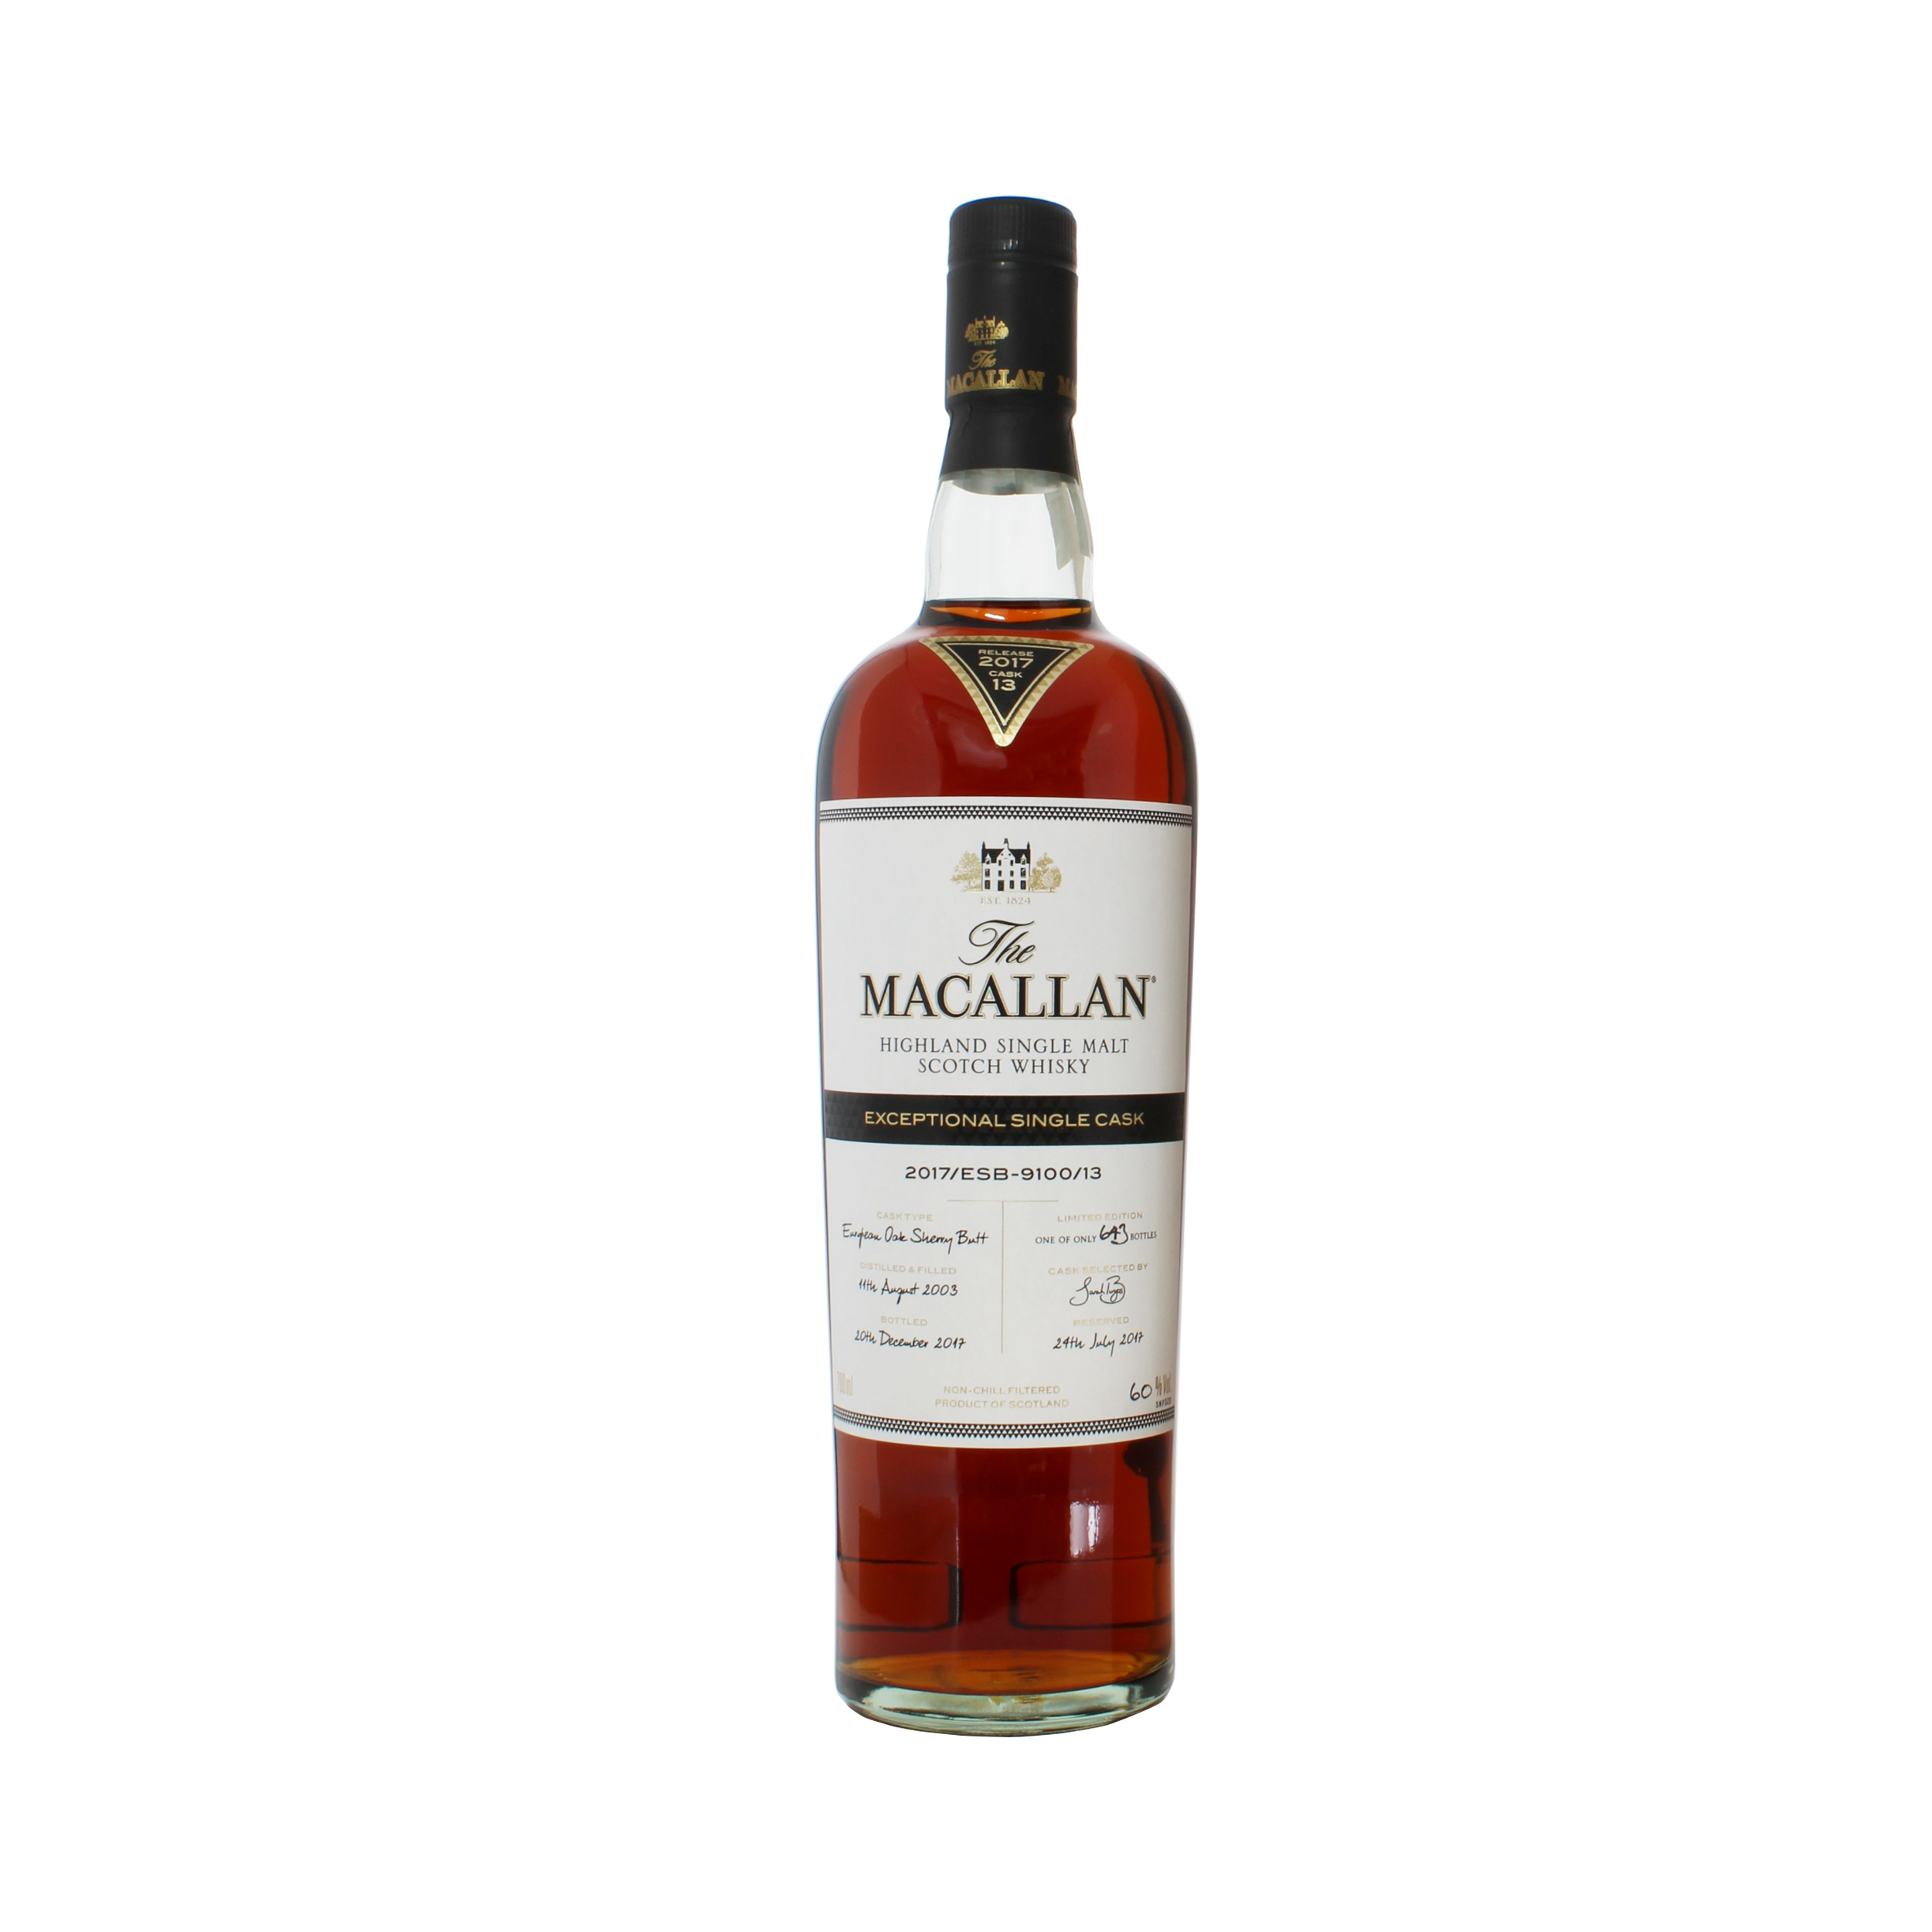 Macallan 2003 14 Year Old Single Exceptional Cask.